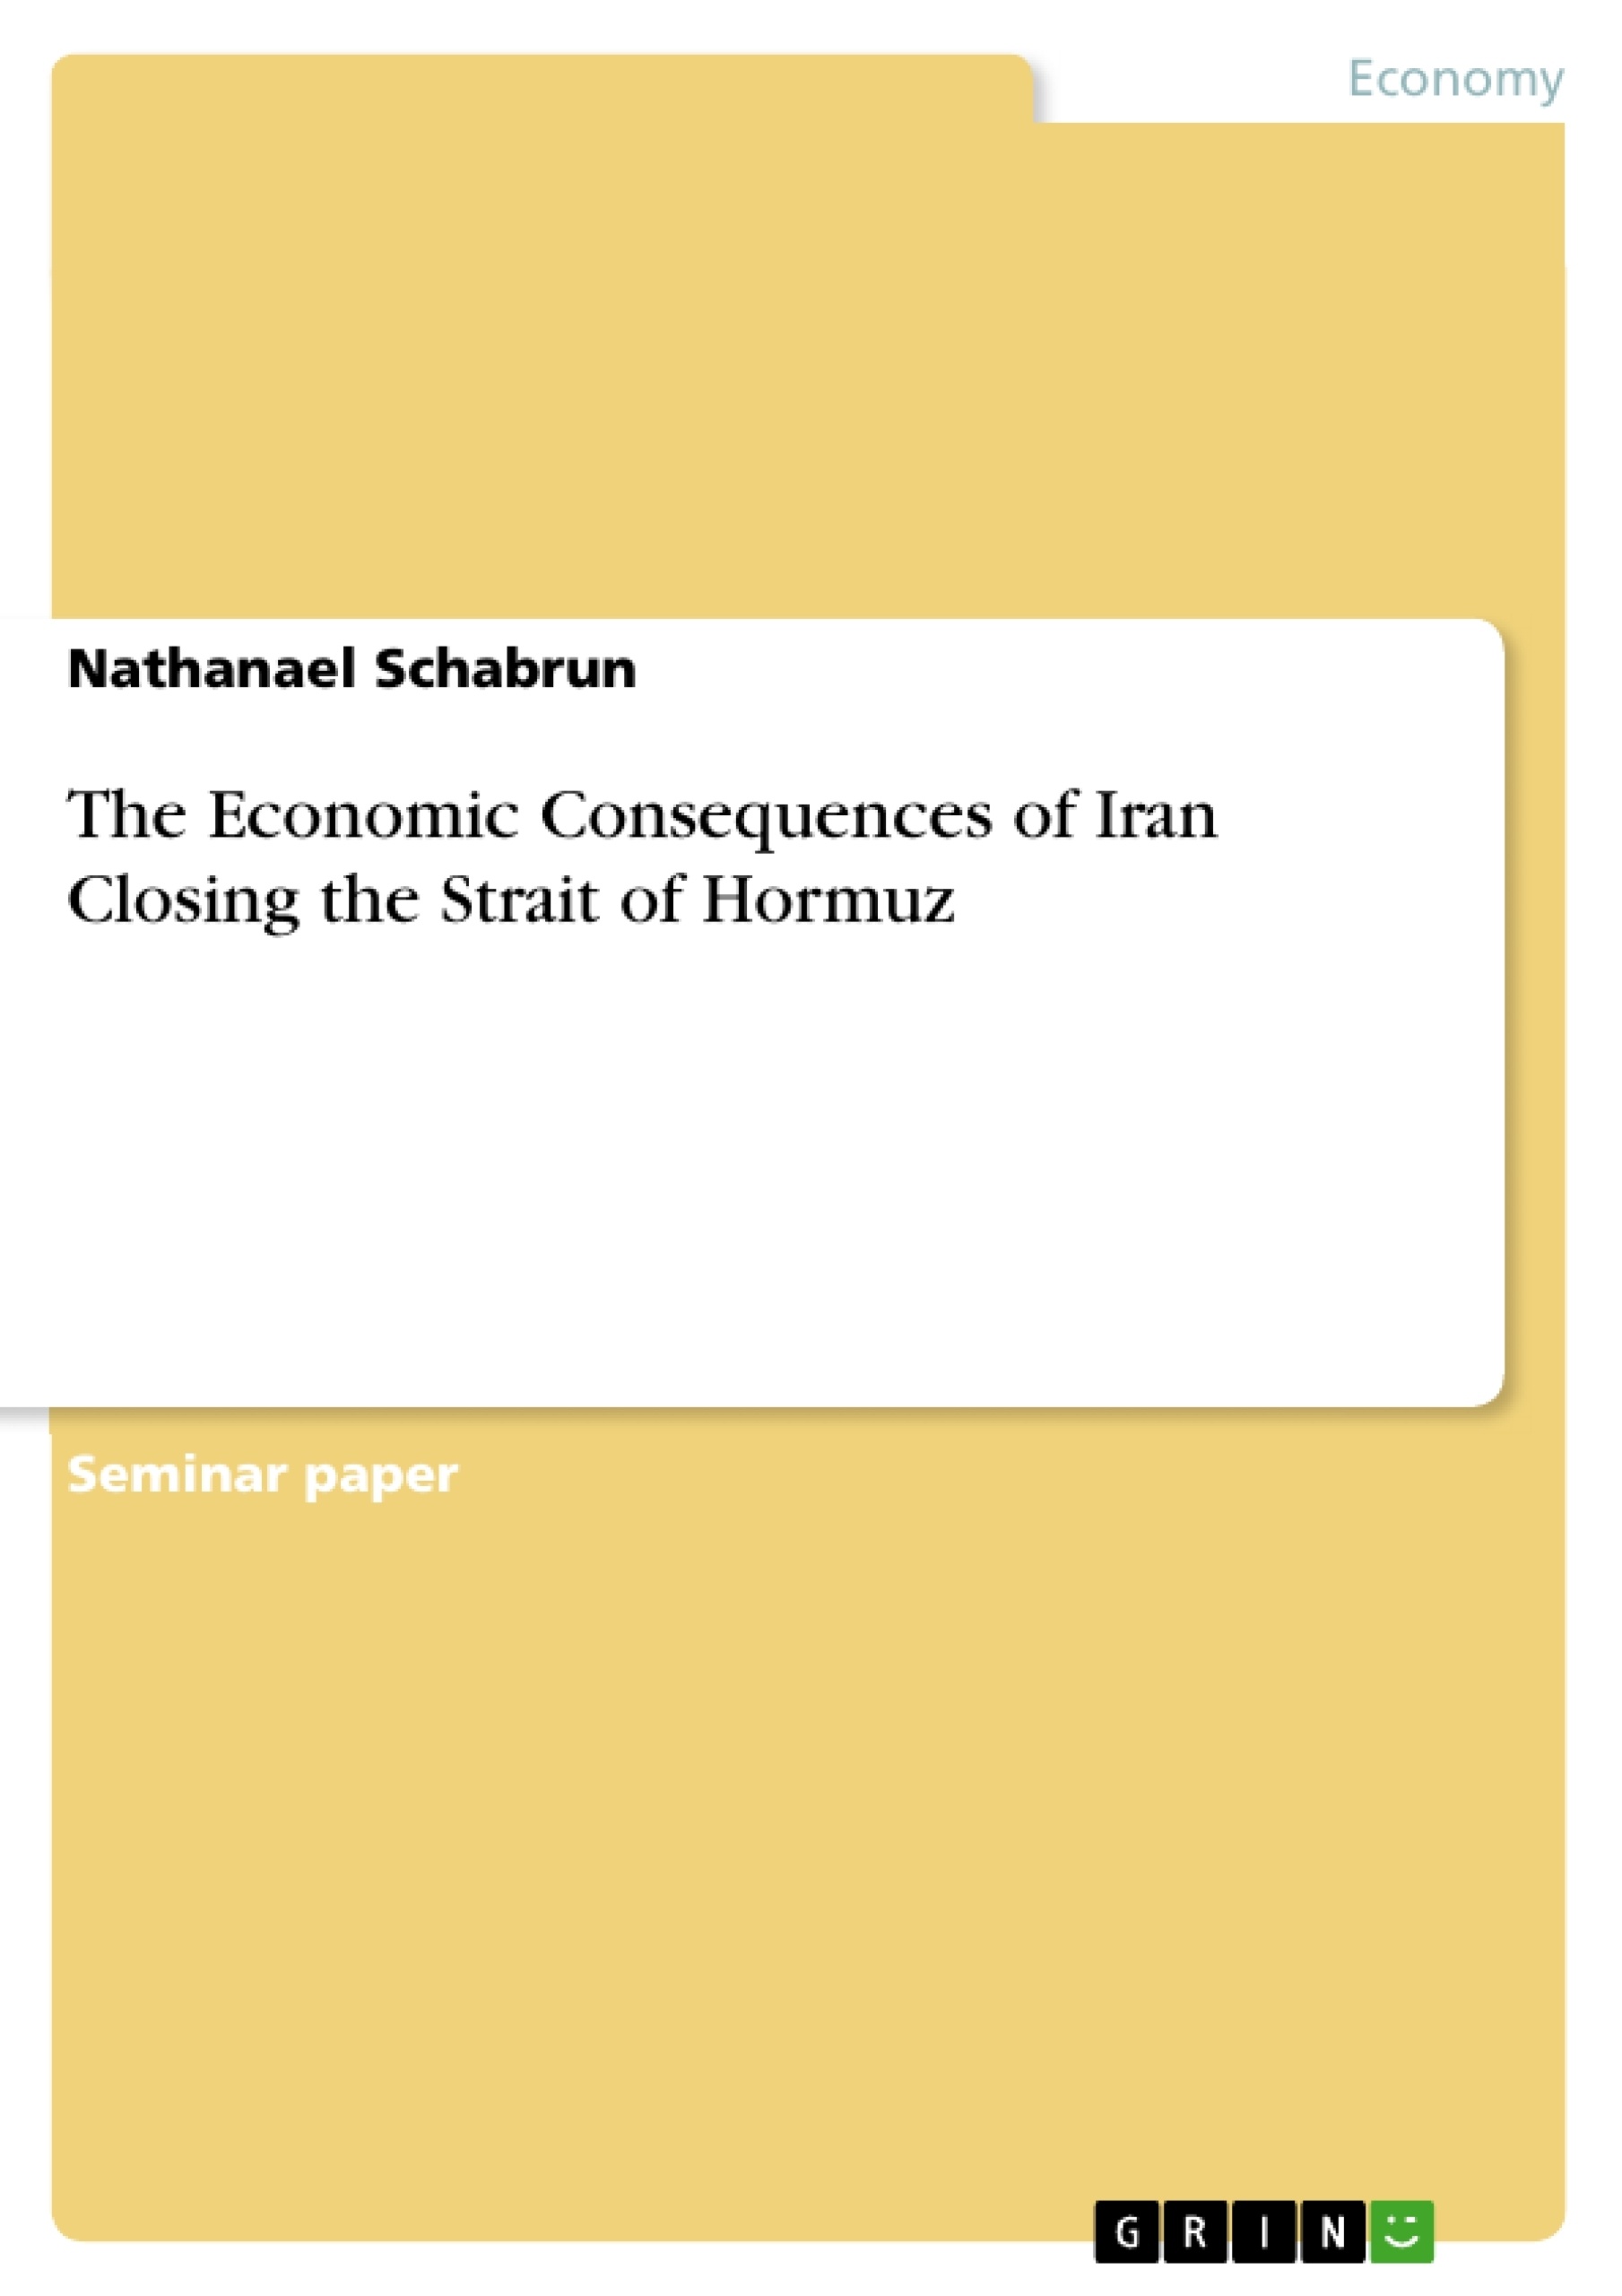 Title: The Economic Consequences of Iran Closing the Strait of Hormuz